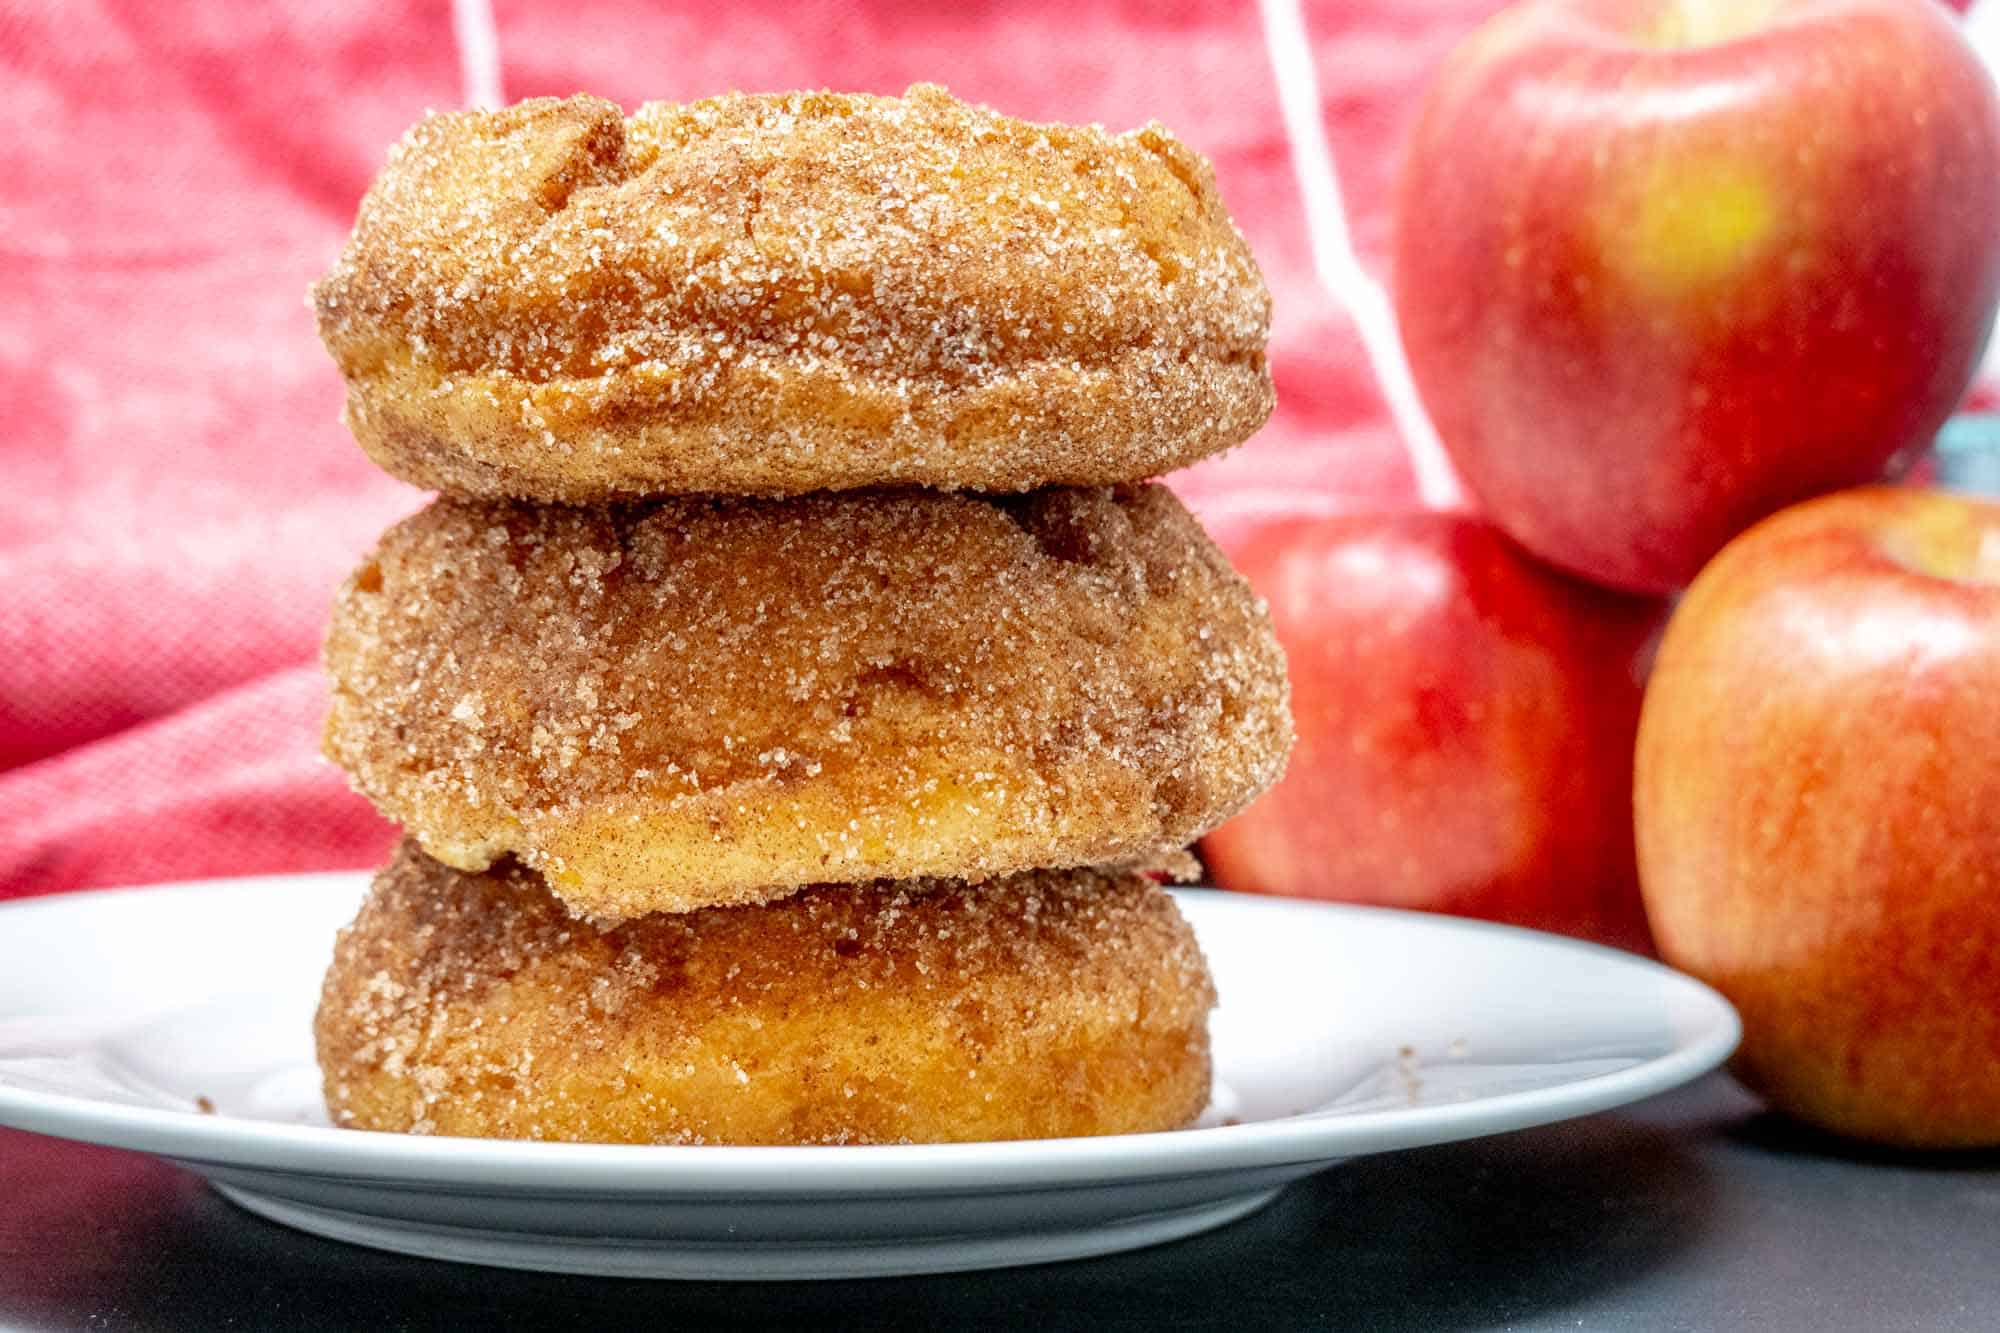 Three cinnamon-sugar donuts stacked on a plate beside a stack of apples